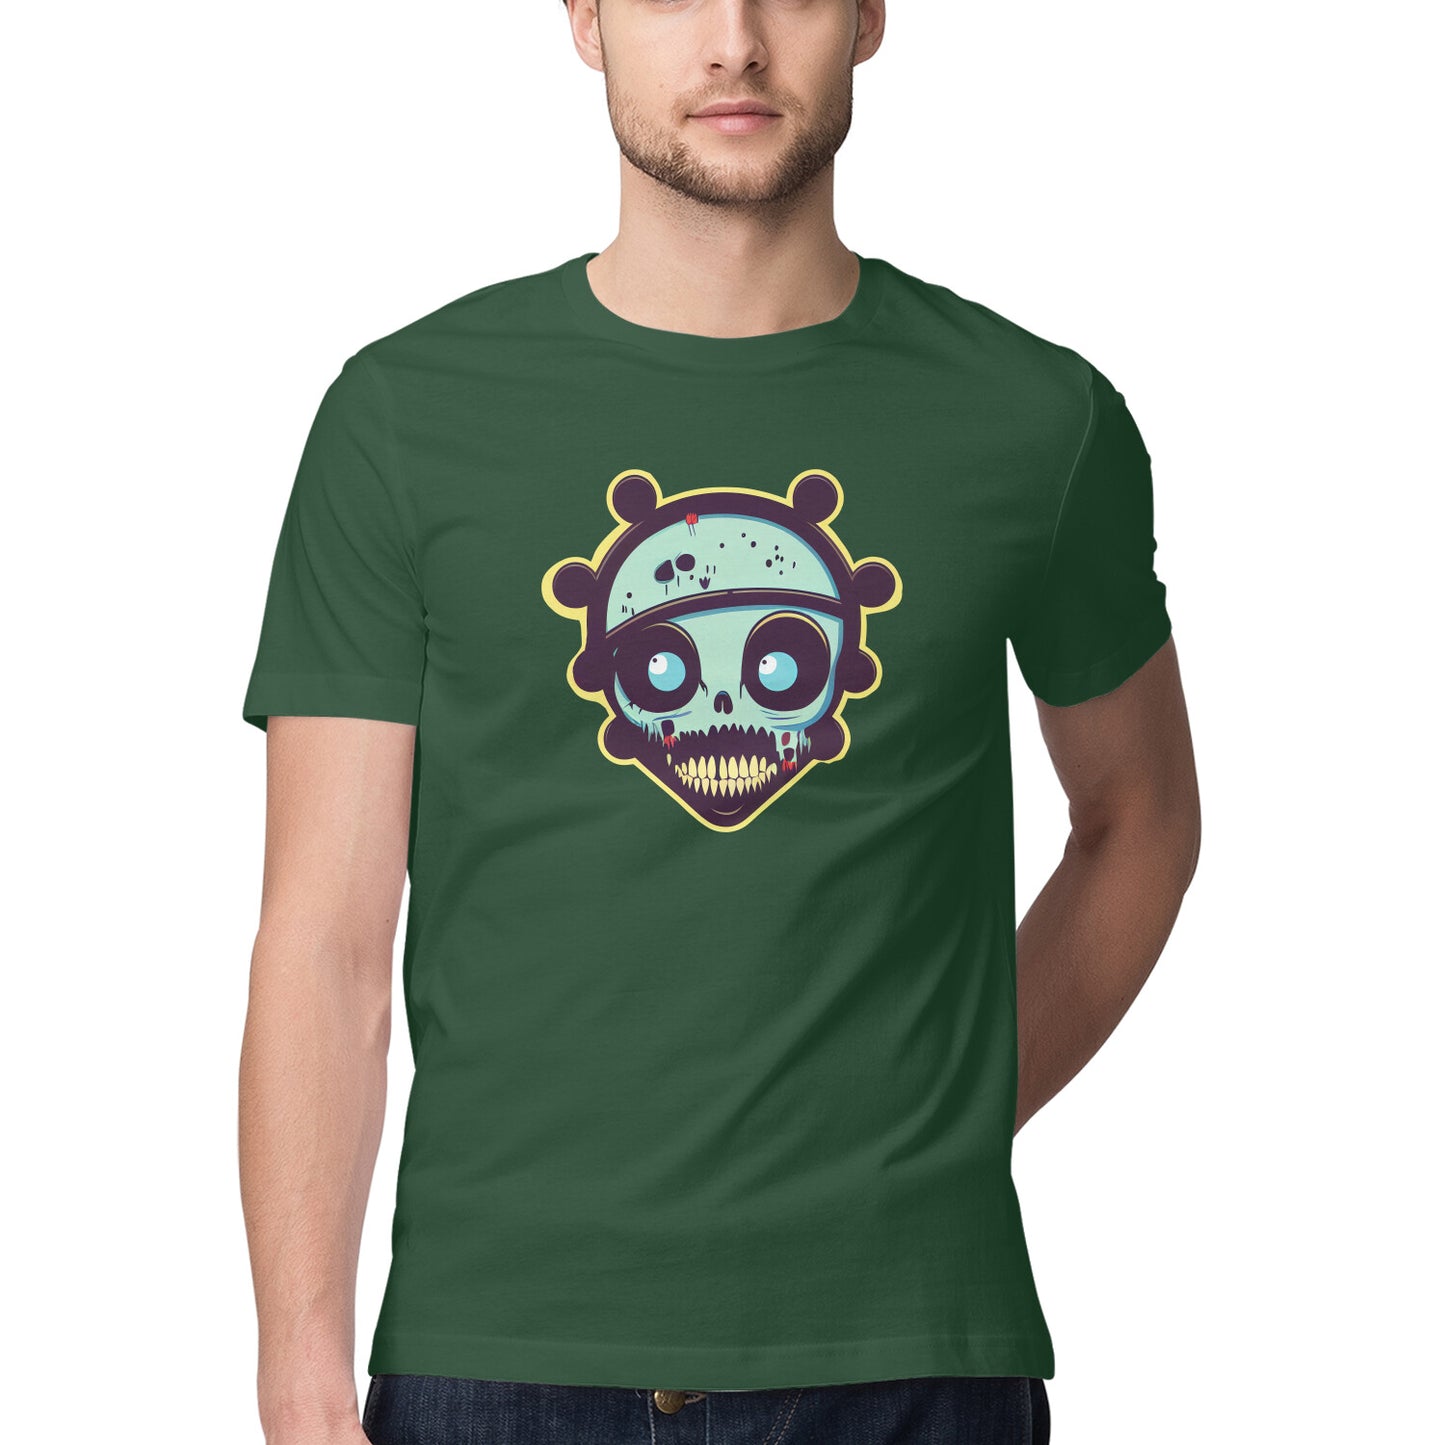 Zombies and monsters Design 8 Printed Graphic T-Shirt